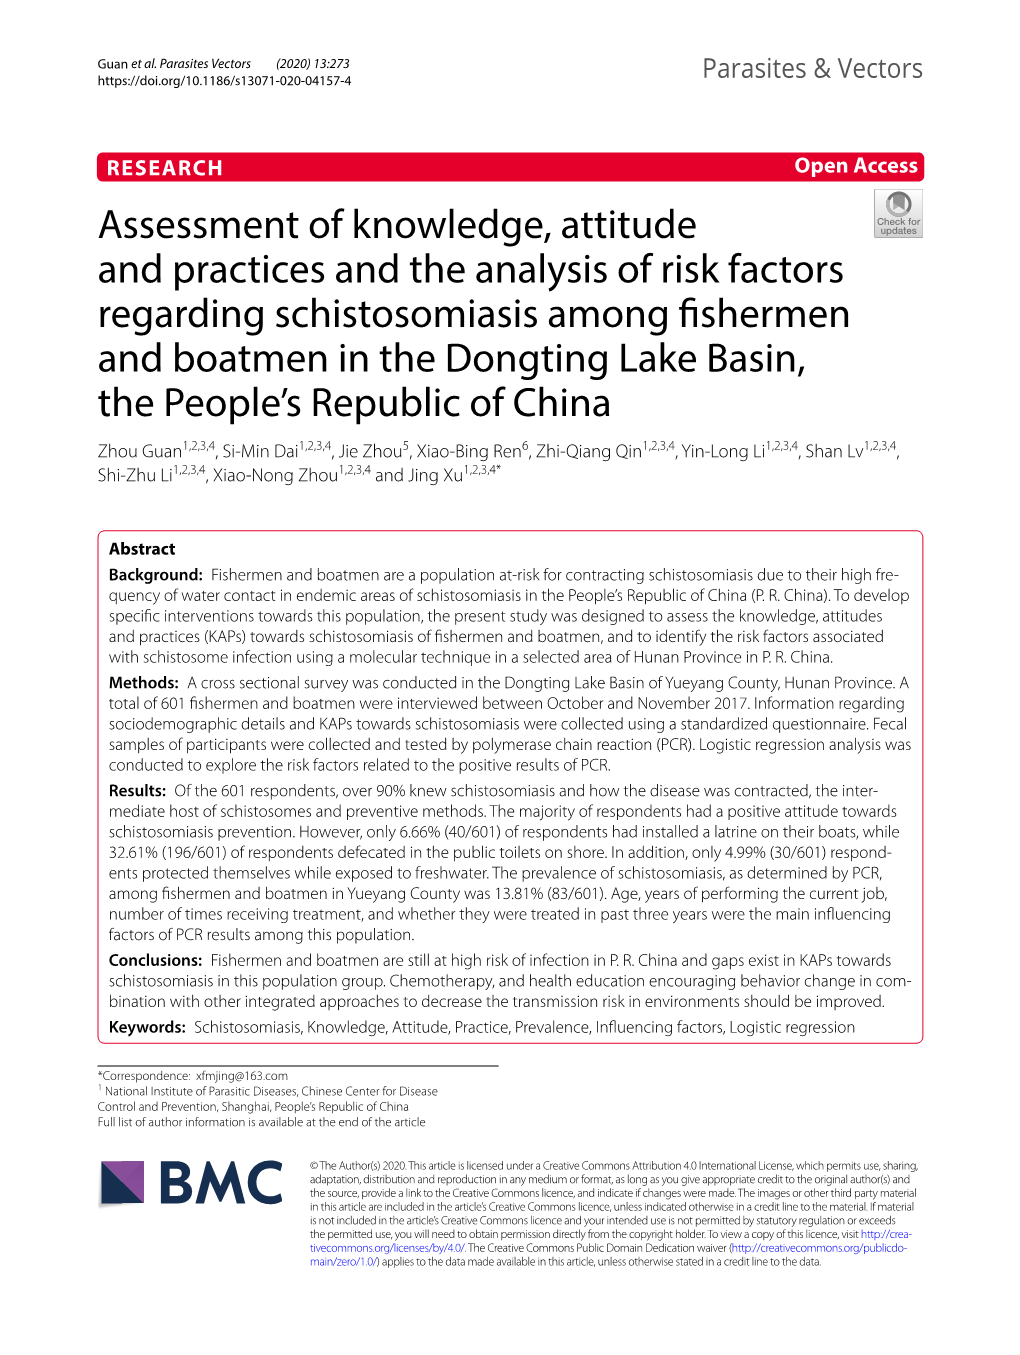 Assessment of Knowledge, Attitude and Practices and the Analysis Of